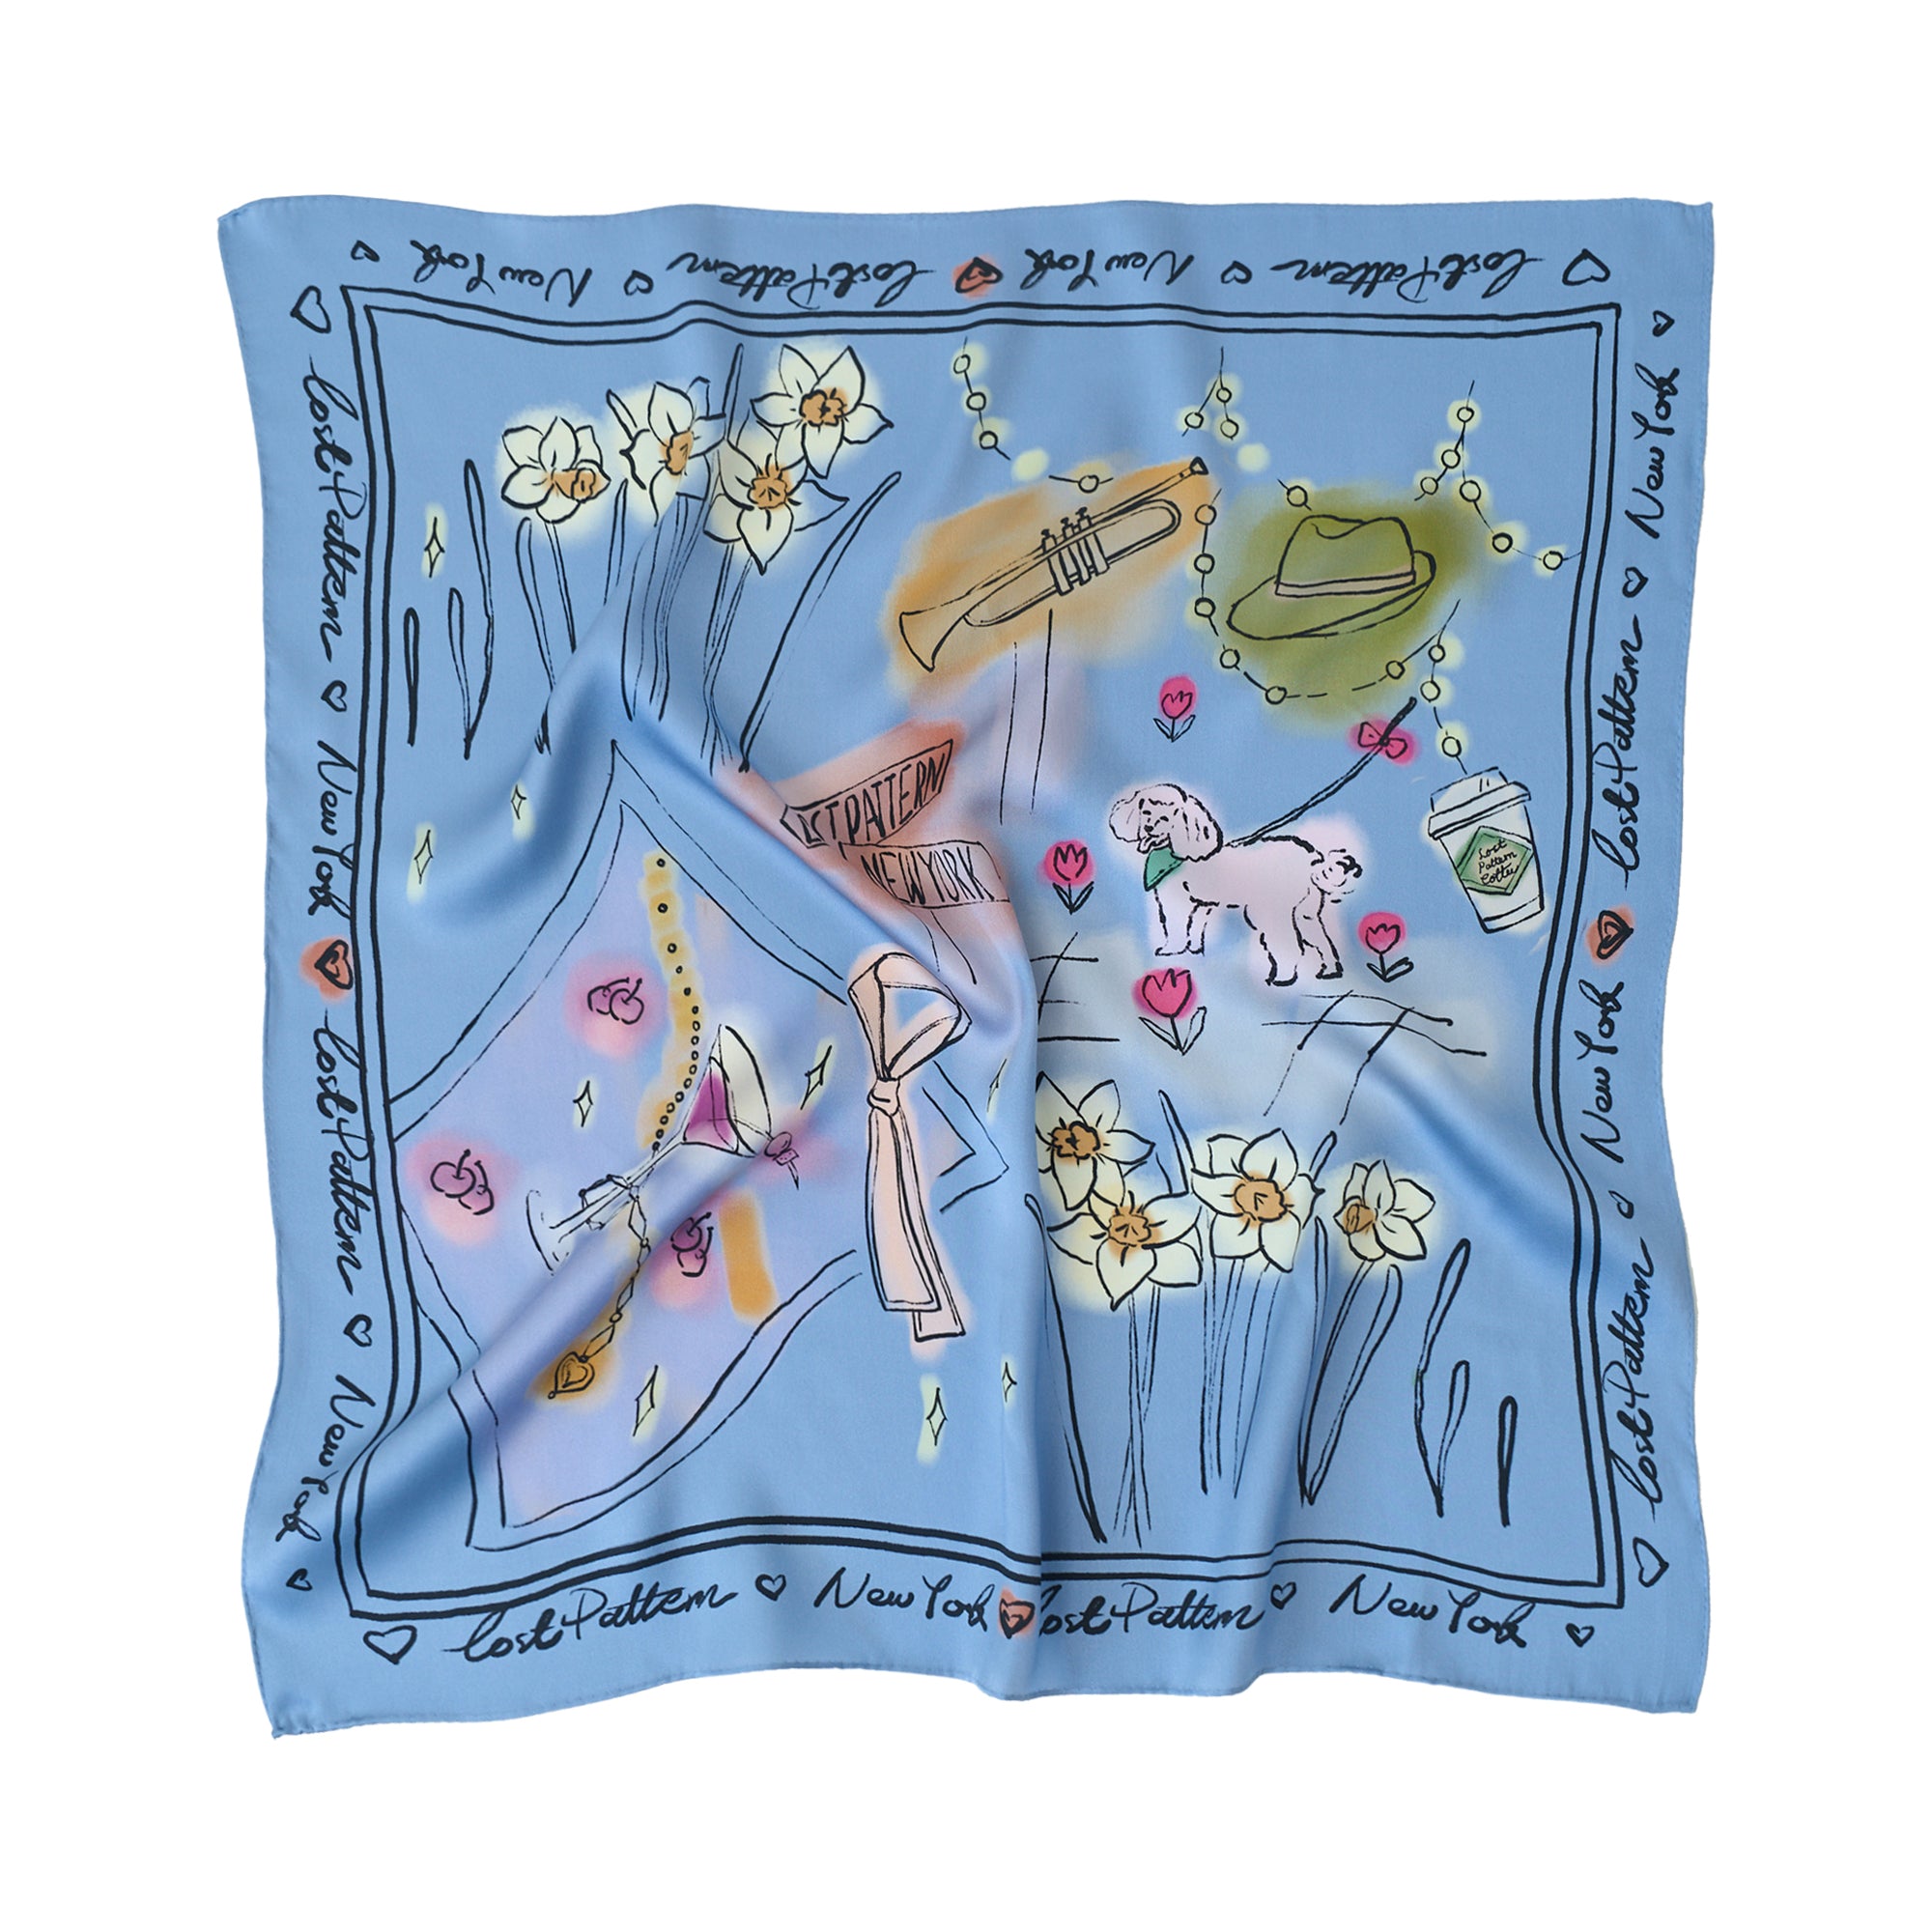 "New York in Sketches" Silk Scarf - Blue - Blue - LOST PATTERN Silk Square Scarf